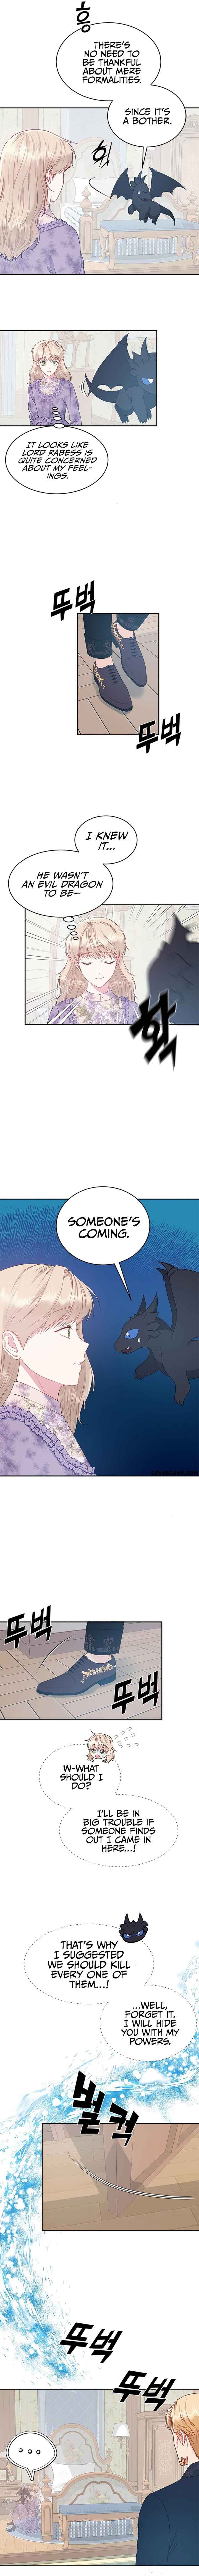 What Does That Evil Dragon Live For? chapter 8